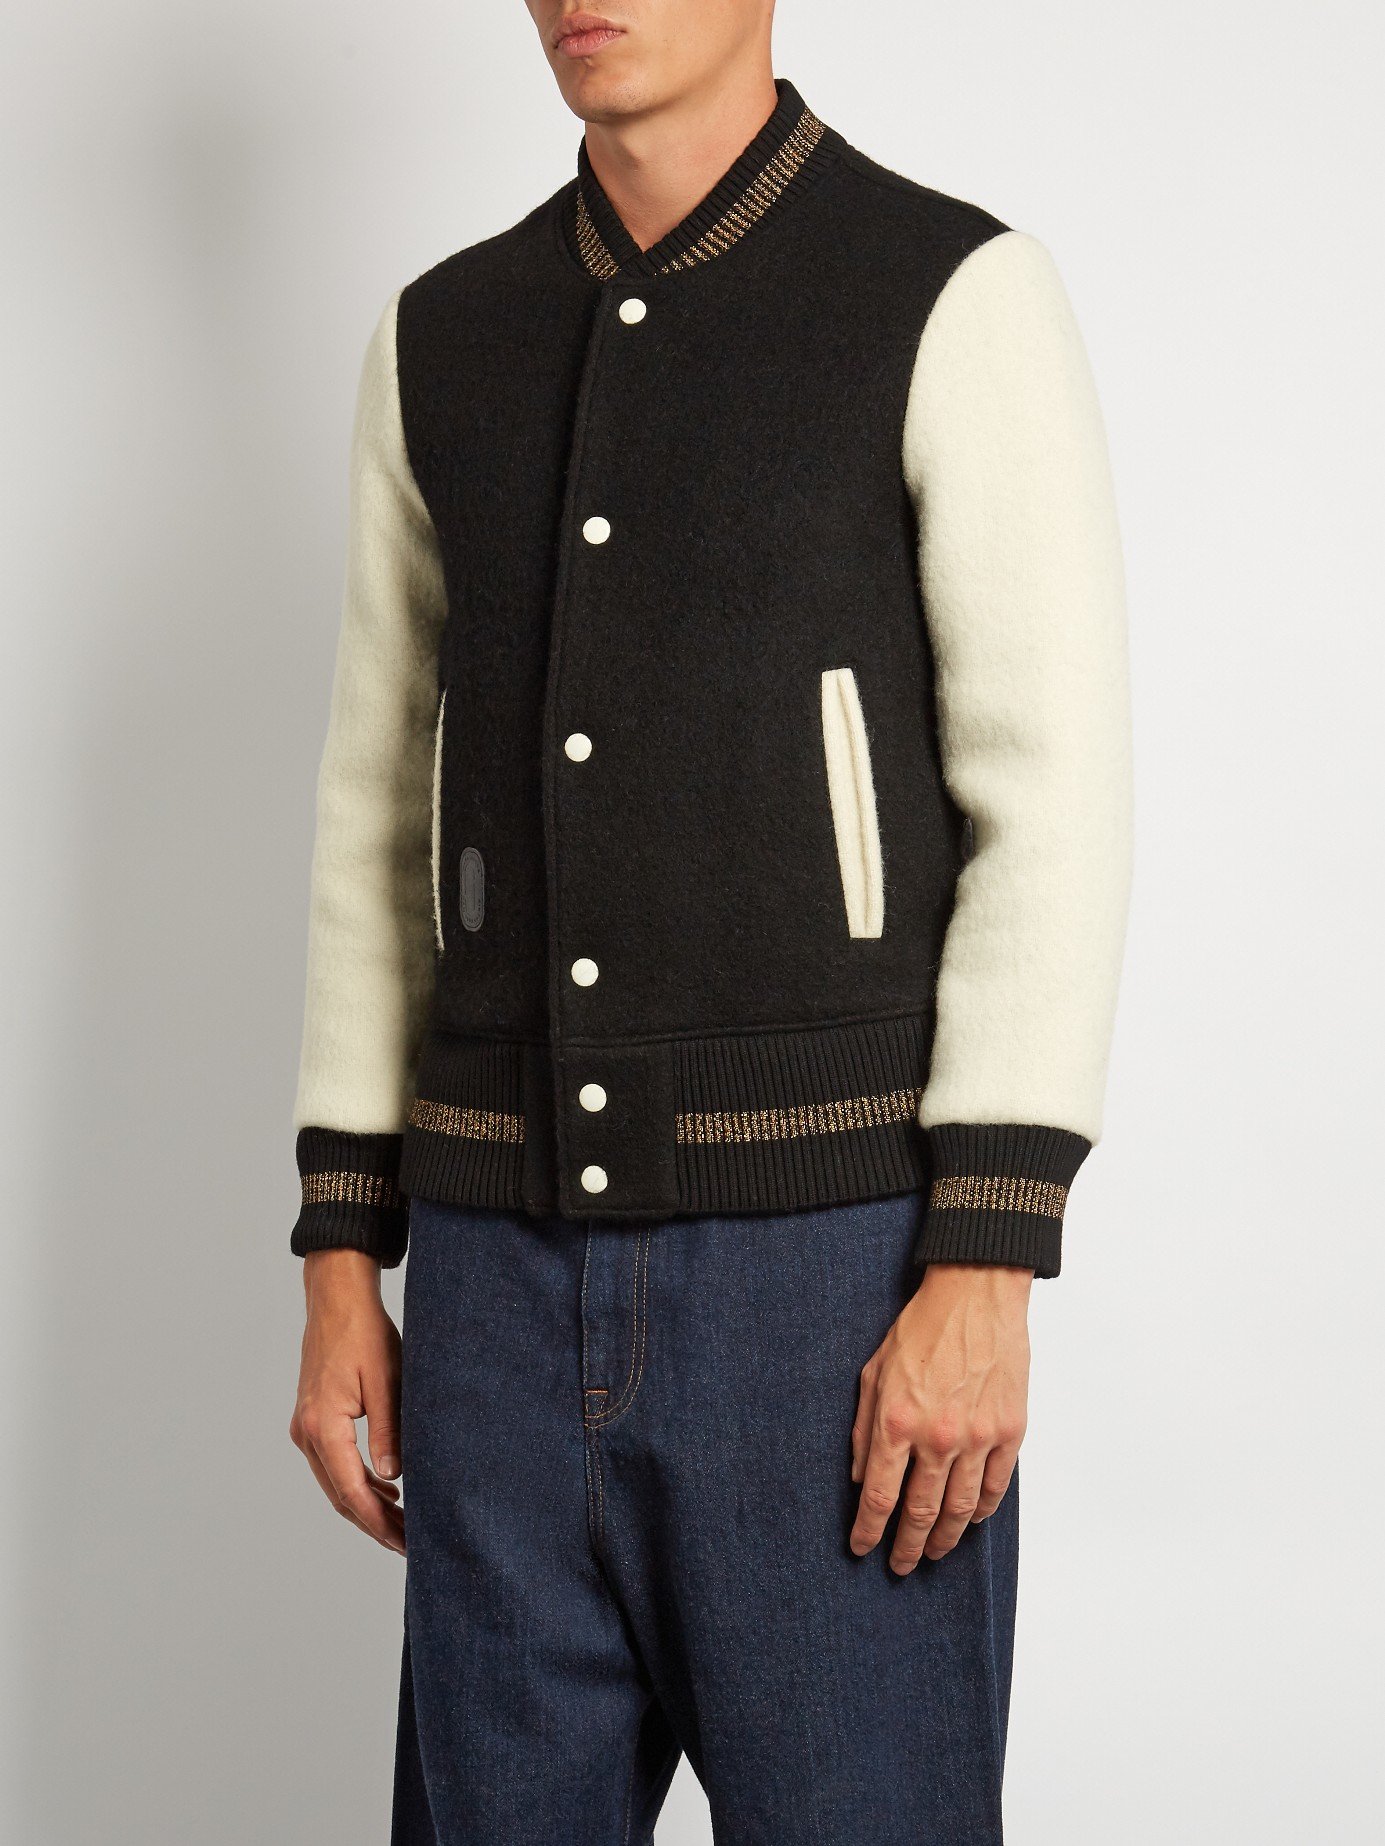 Marc jacobs Contrast-sleeve Wool Bomber Jacket in Black for Men | Lyst